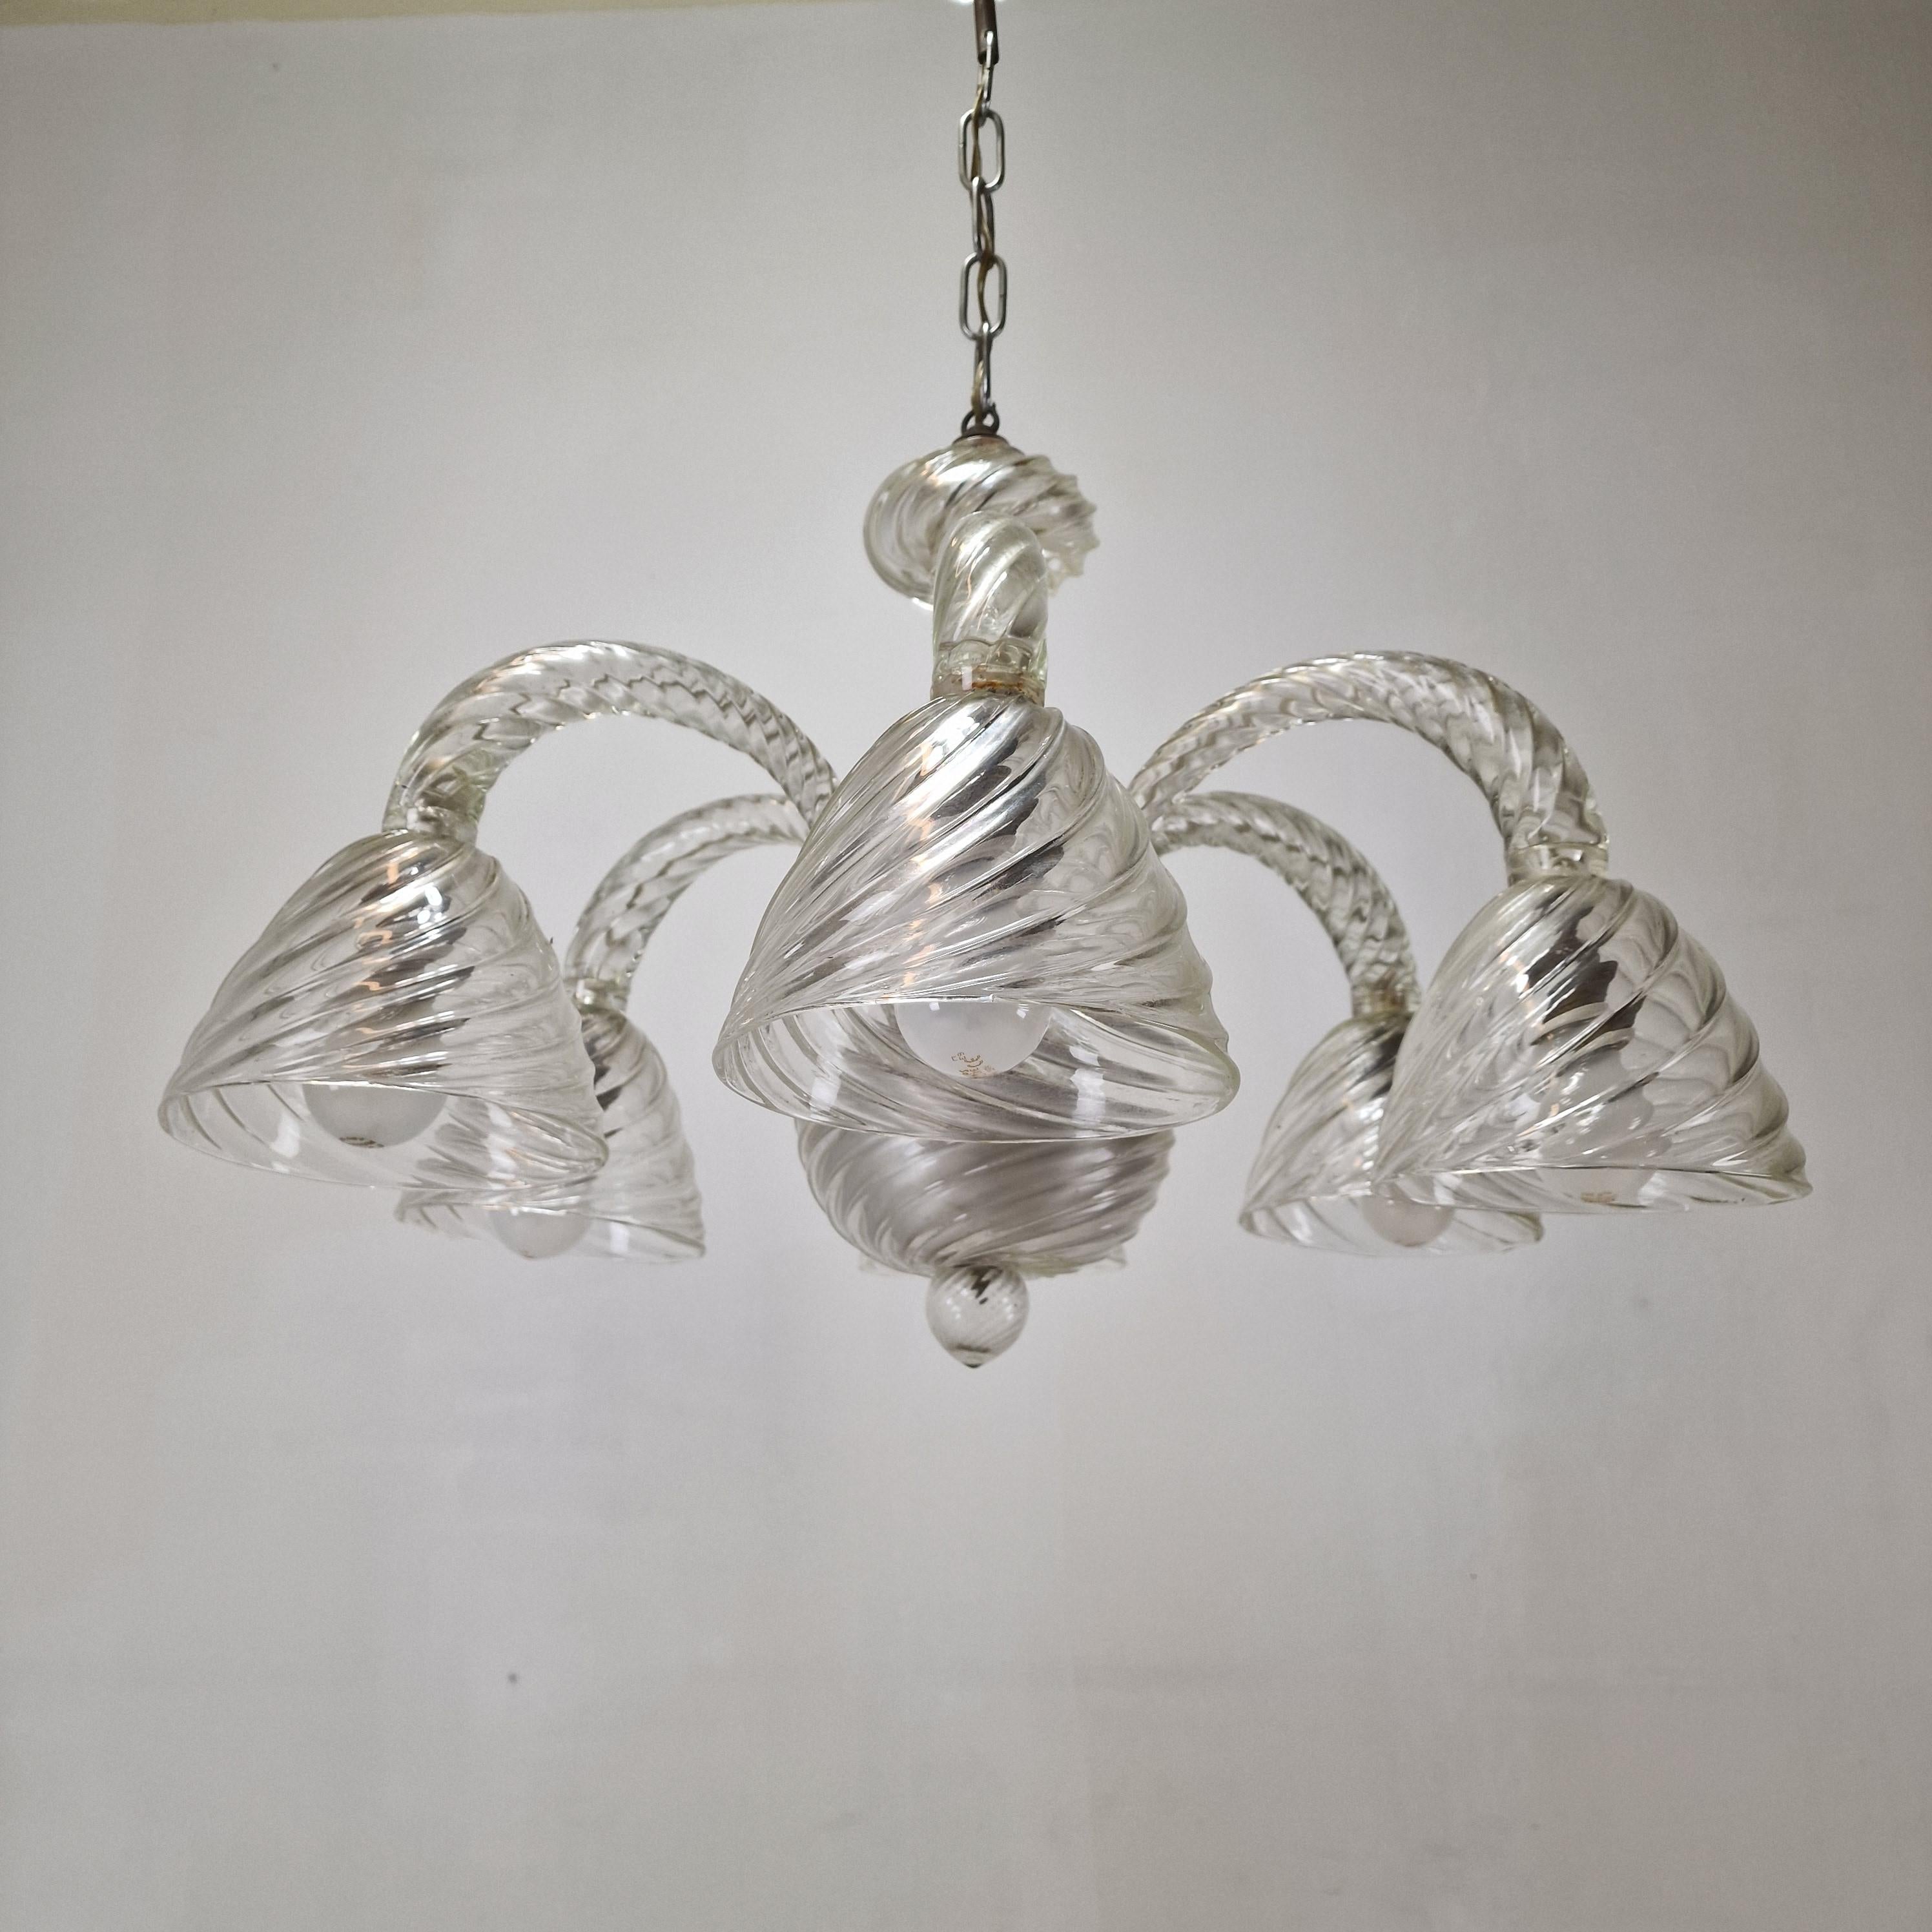 Barovier & Toso Murano Glass Chandelier, Italy 1950's For Sale 1